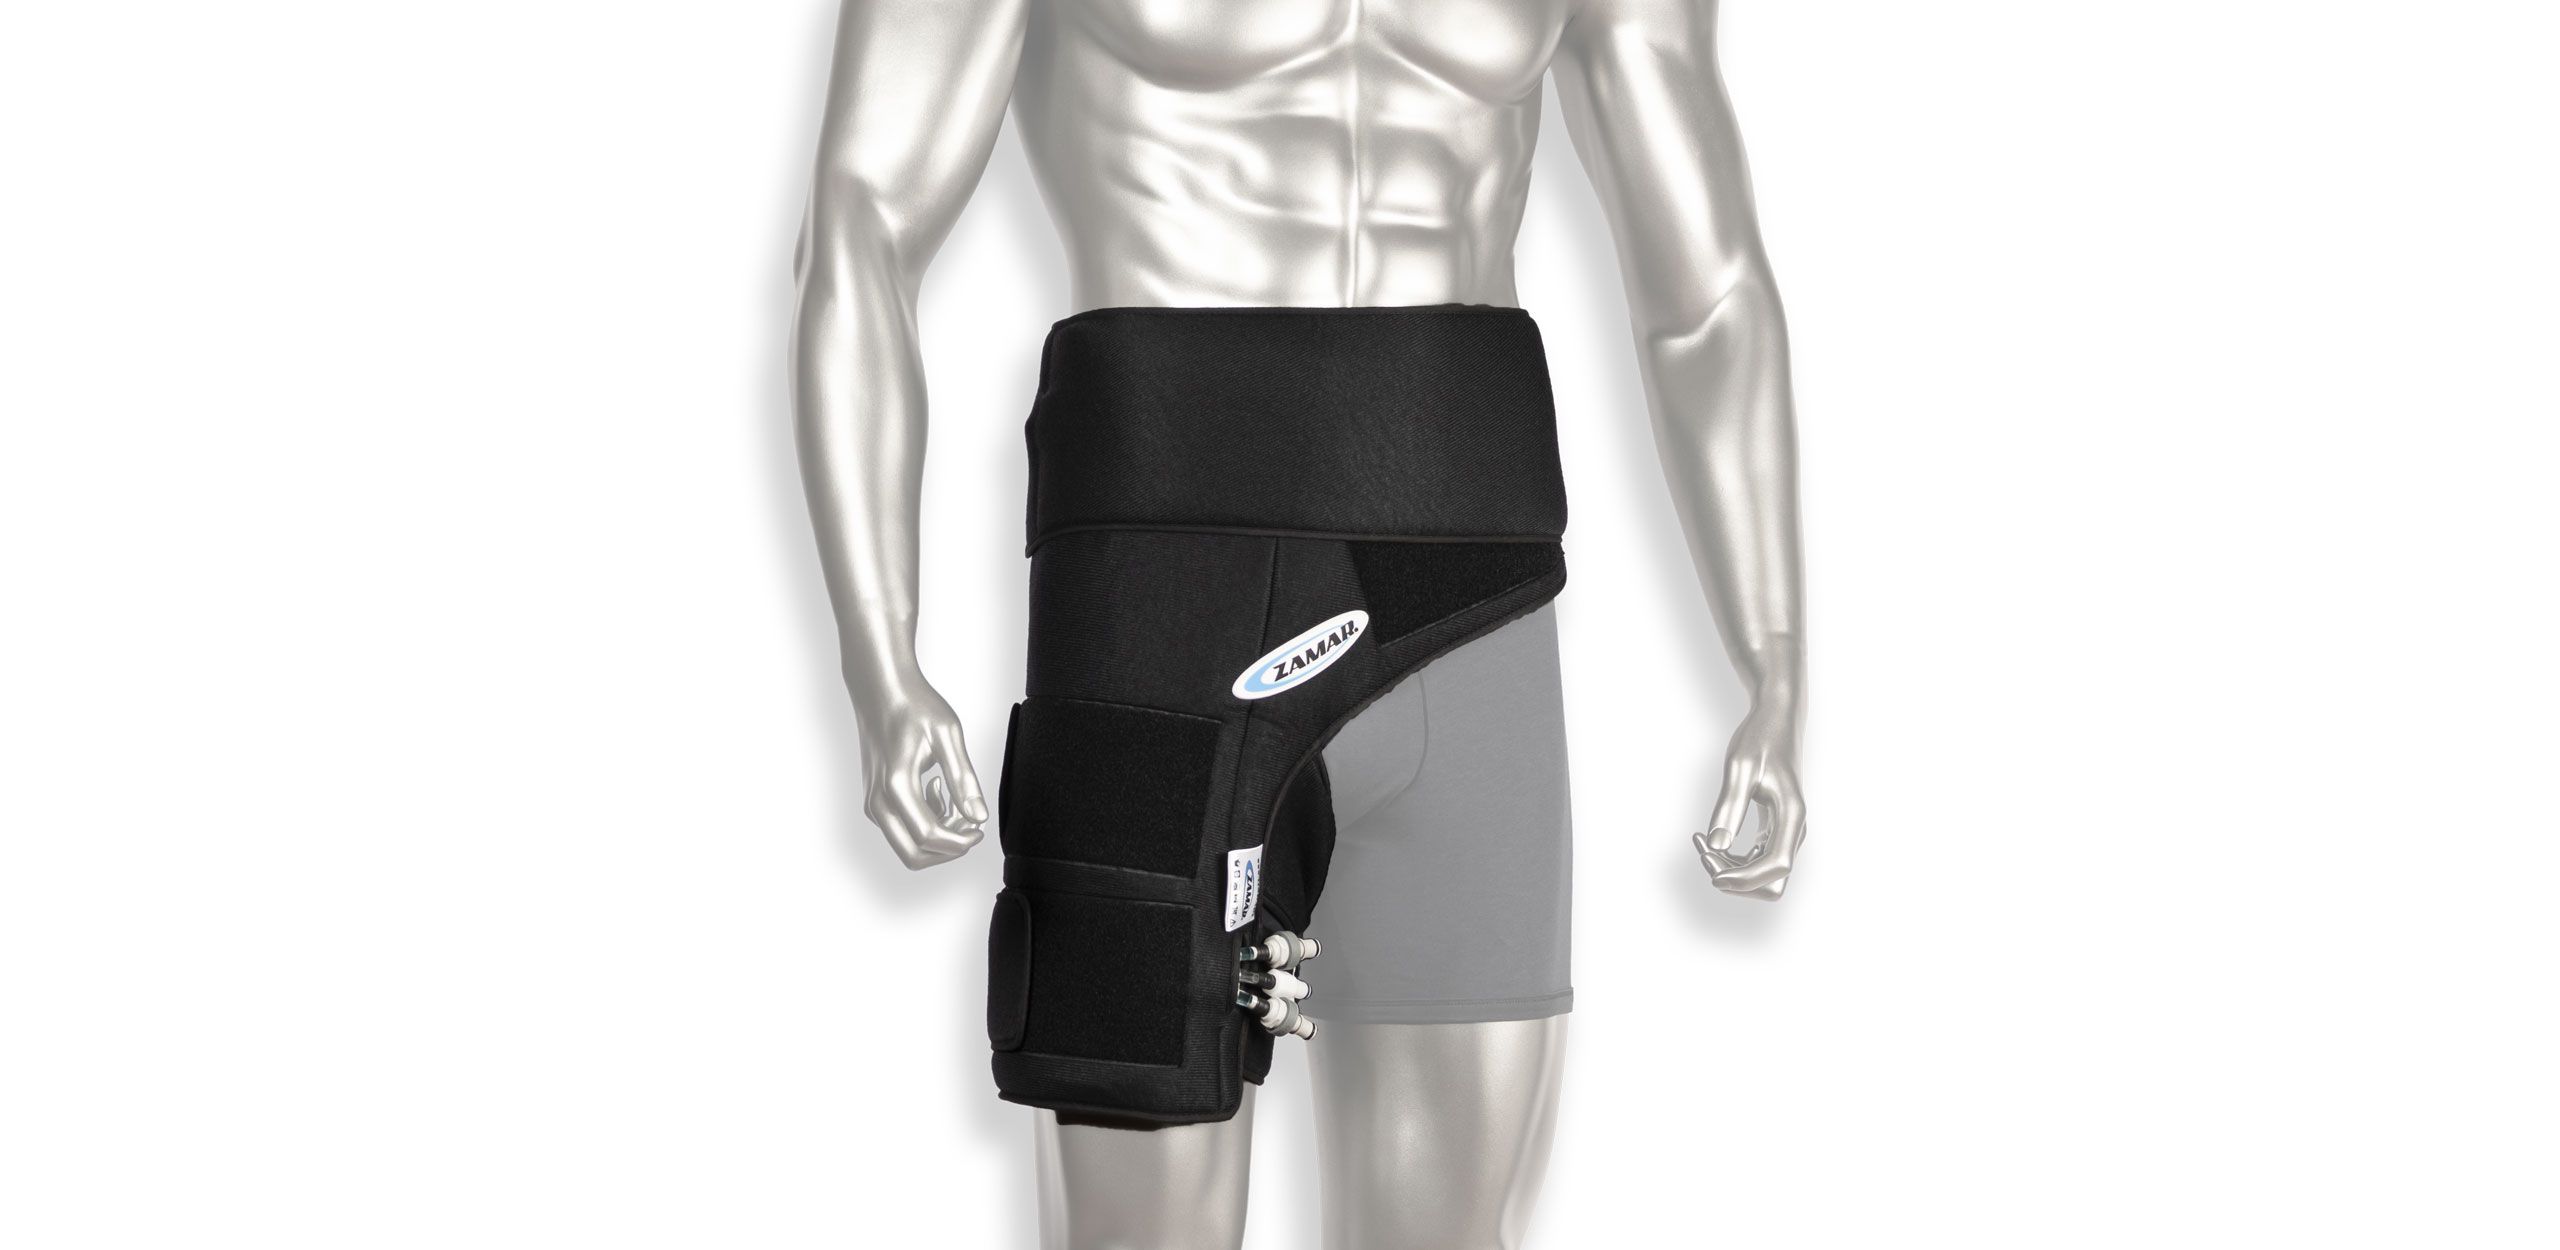 Zamar Hot and Cold Therapy Wraps - Right Hip Wrap Anatomic Design